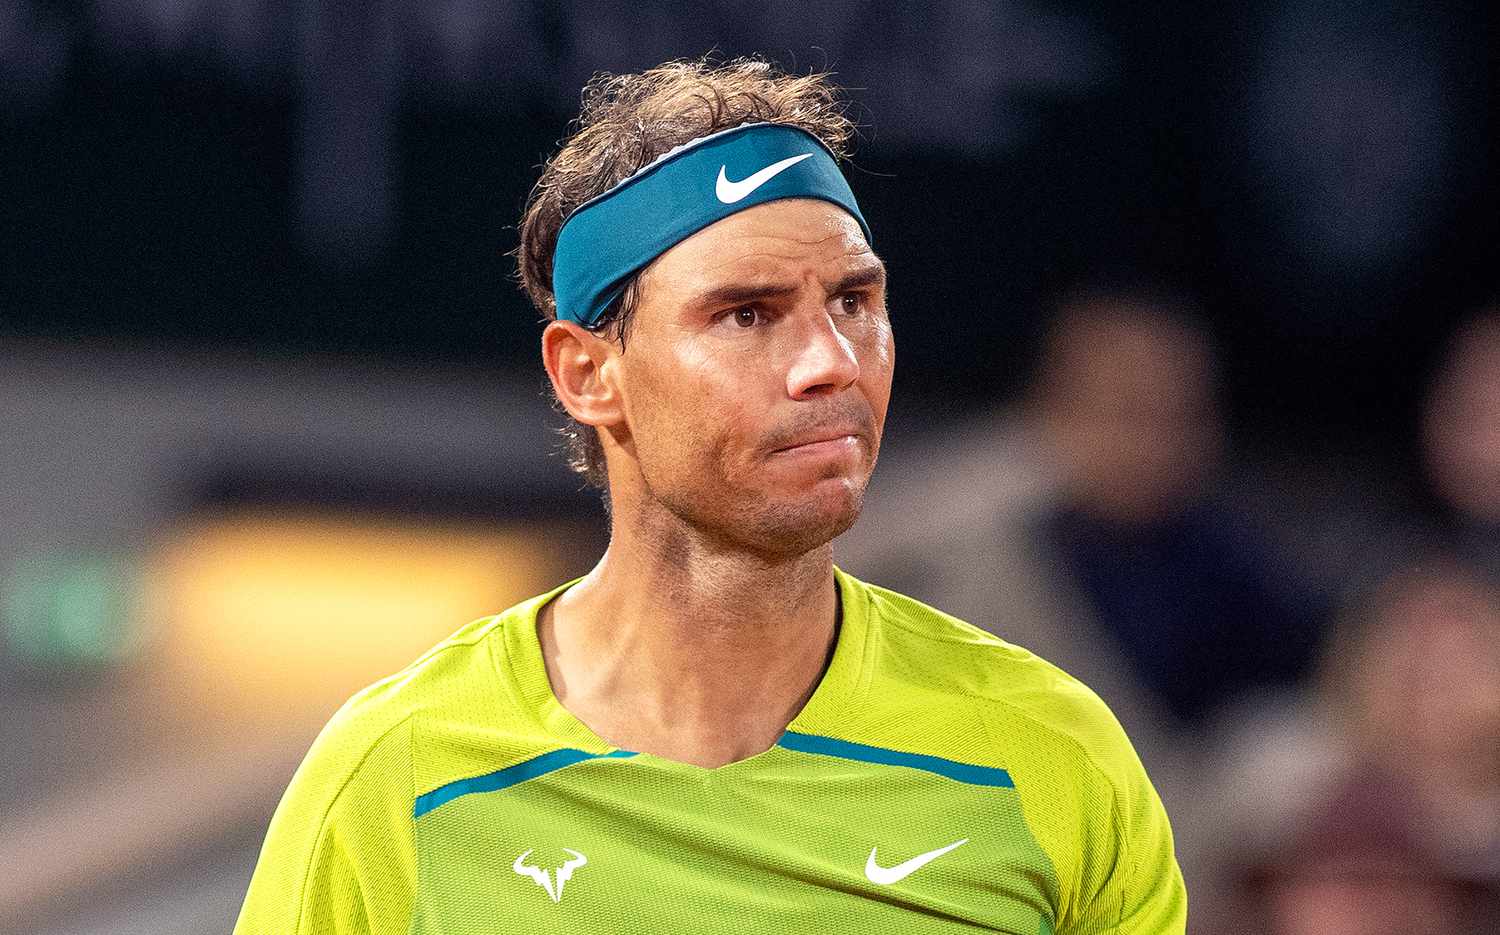 ATP Rankings: Rafael Nadal's 18-year old reign in Top 10 of ATP Rankings ends, 22-time Grand Slam champion drops to No.13 in latest ATP Rankings - Check Out 